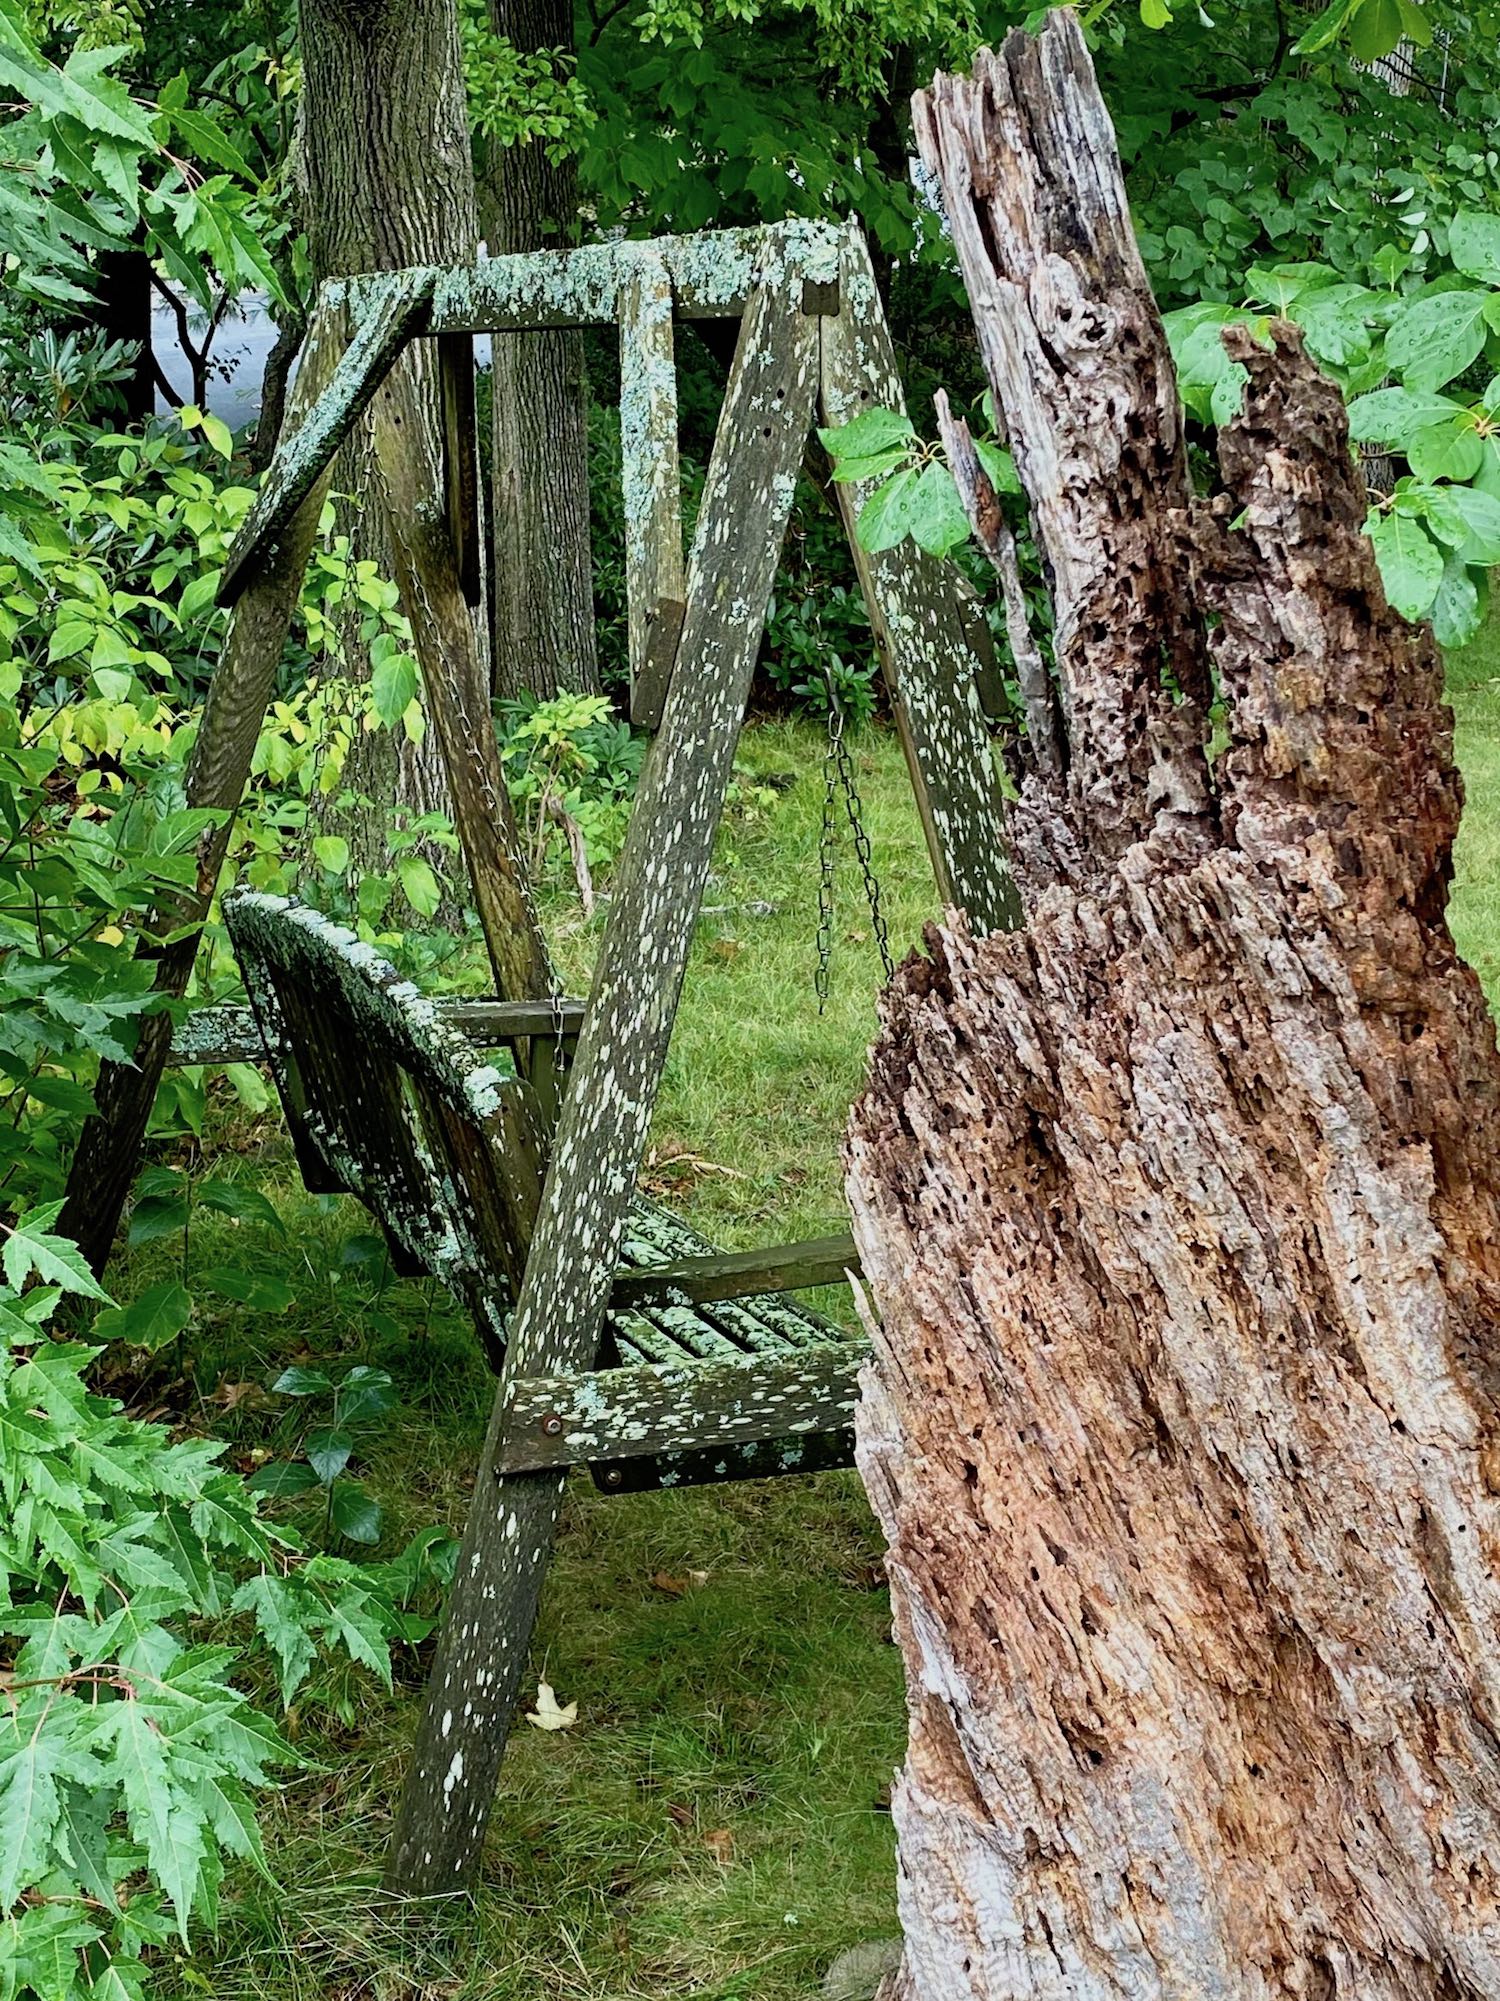 It's the weekend! Number 266, Lichen-Covered Wood Swing Chair in a Backyard